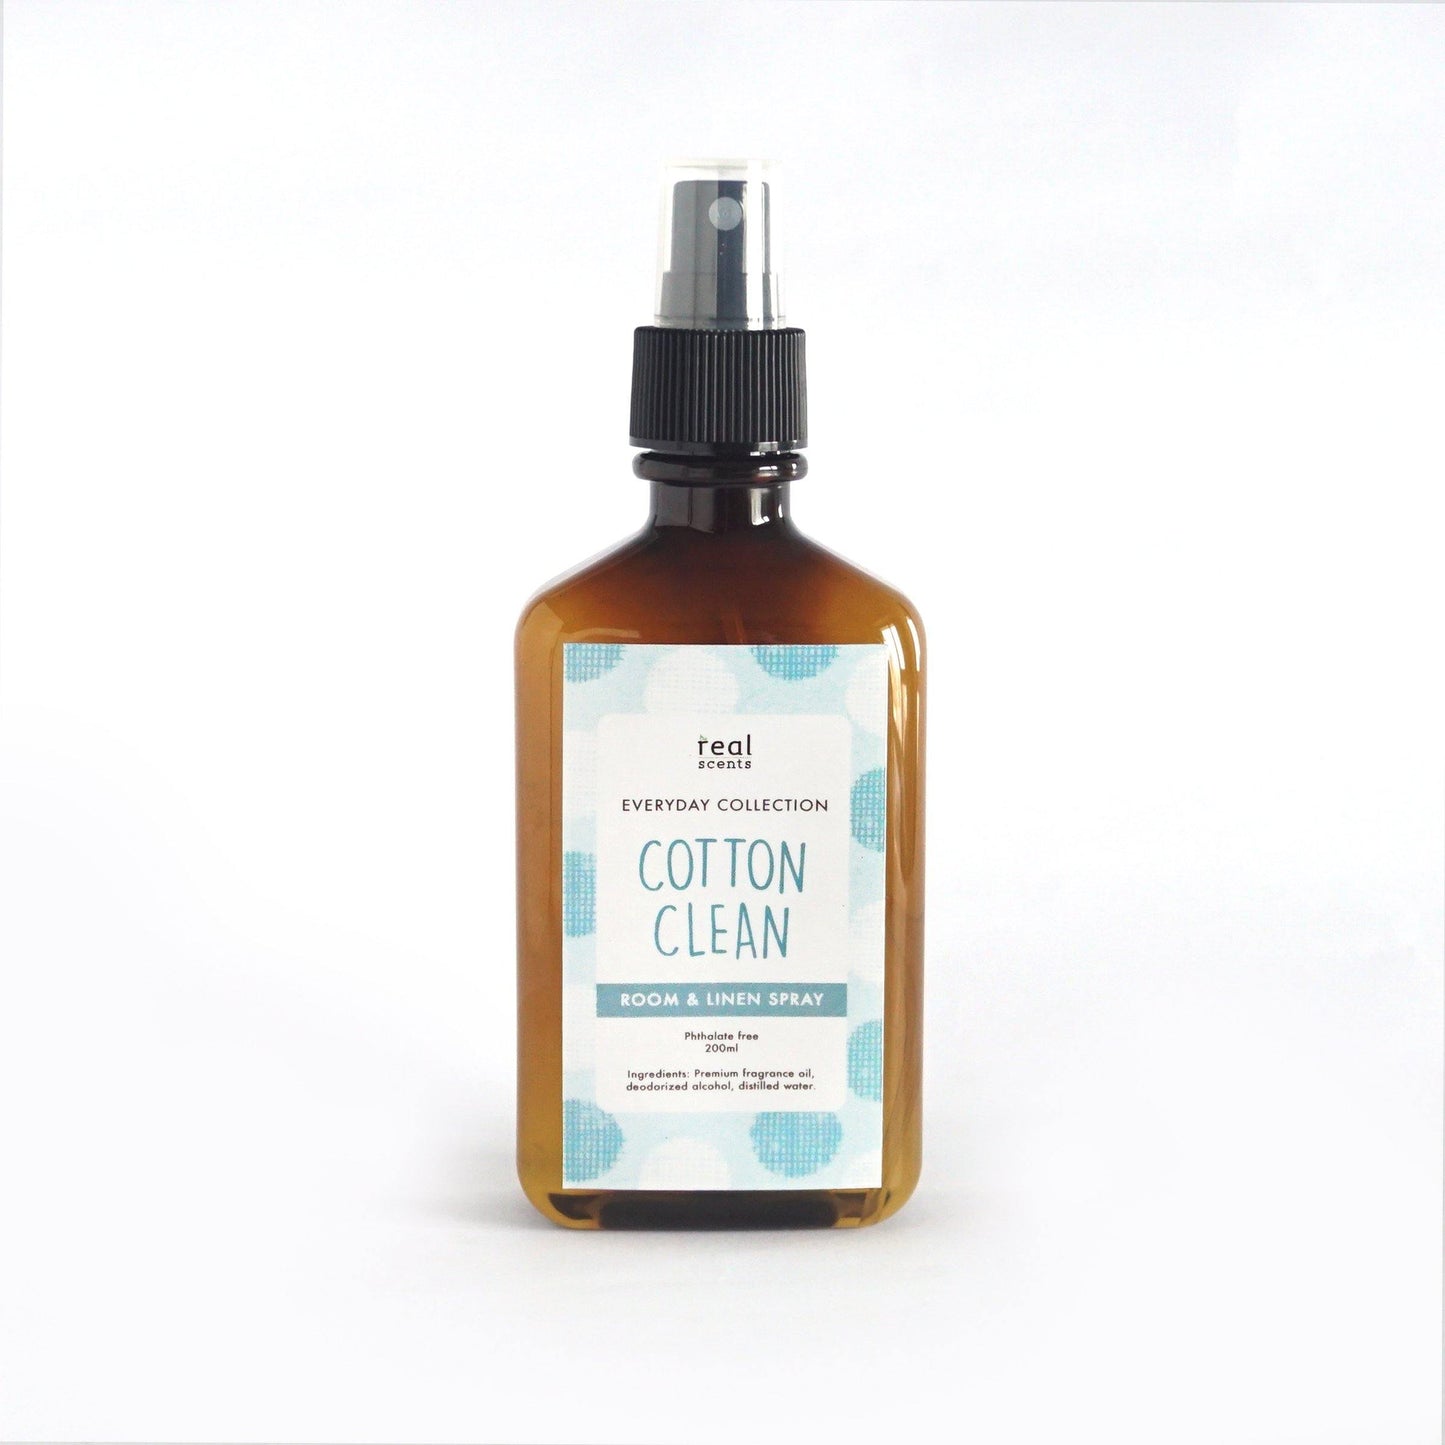 Cotton Clean Room & Linen Spray-Real Scents PH-Simula PH